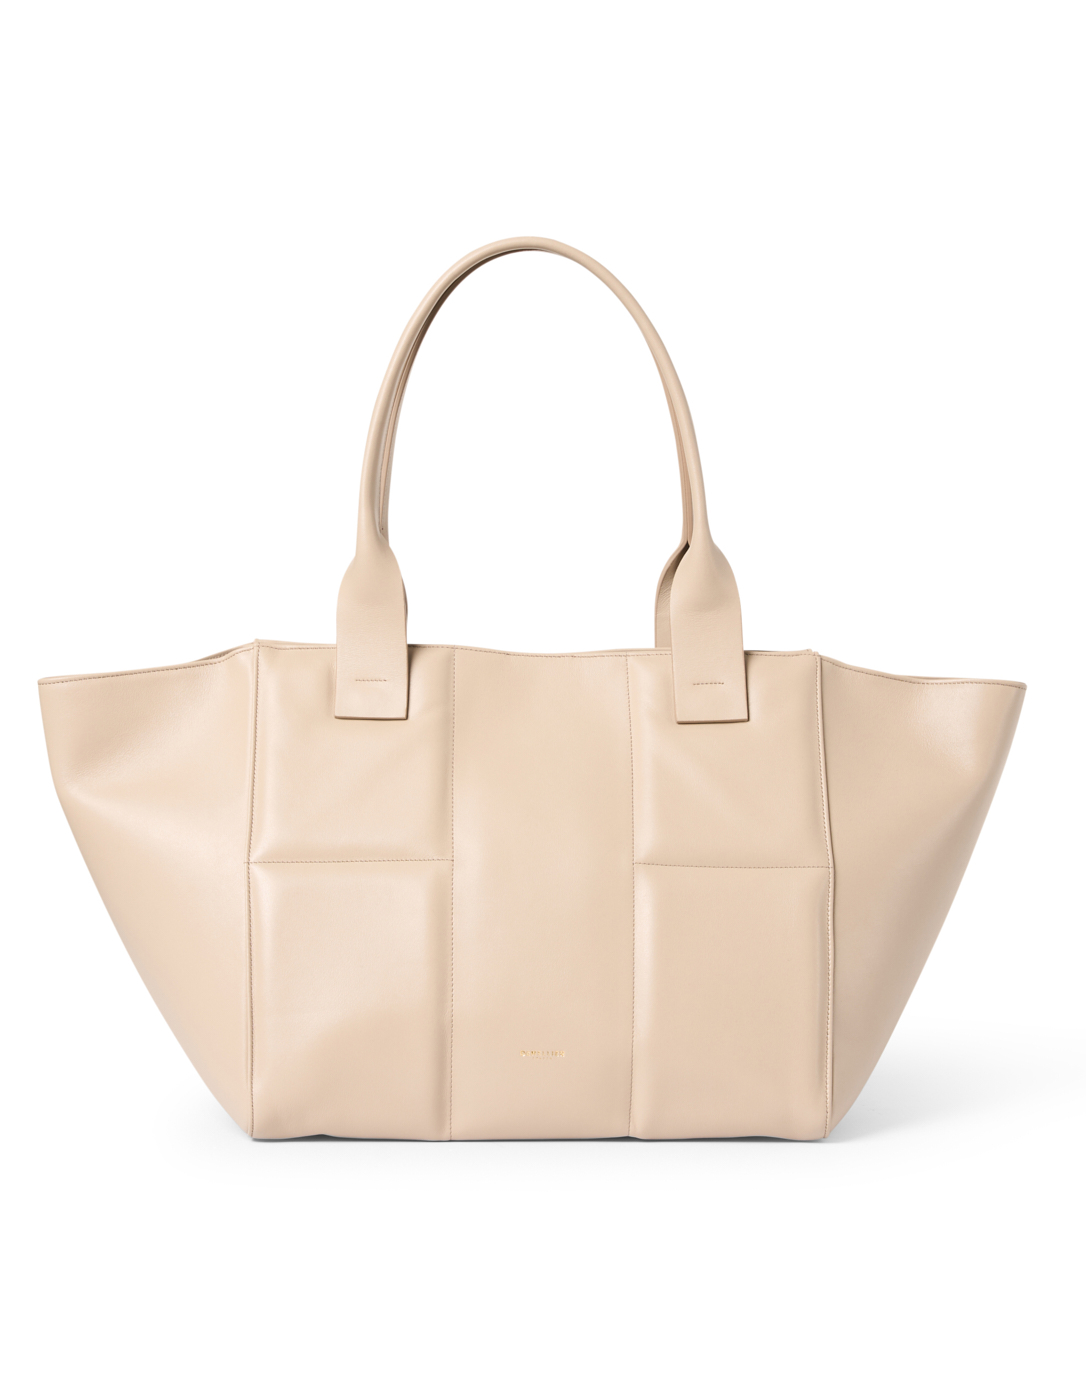 DeMellier The Midi New York Leather Tote Bag in Brown